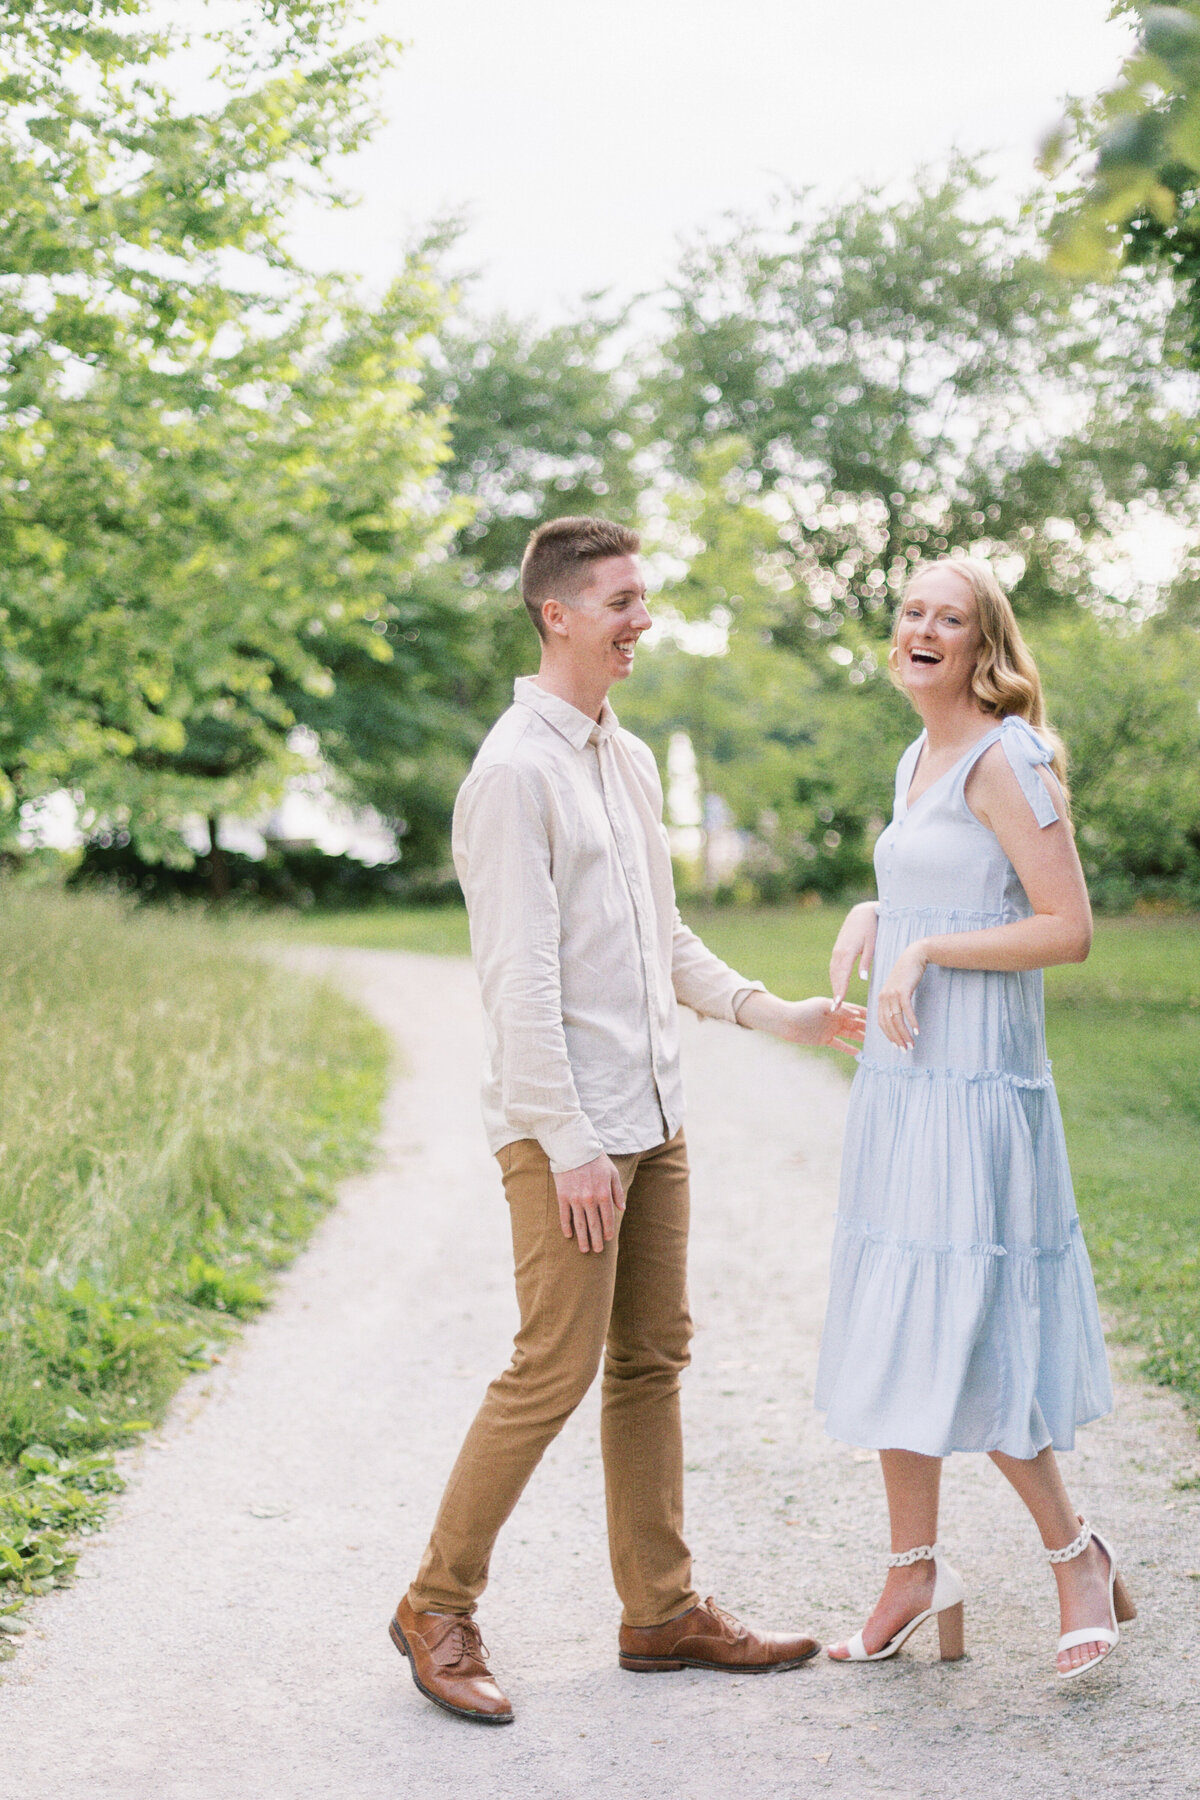 amber-rhea-photography-midwest-wedding-photographer-stl-engagement210A5065